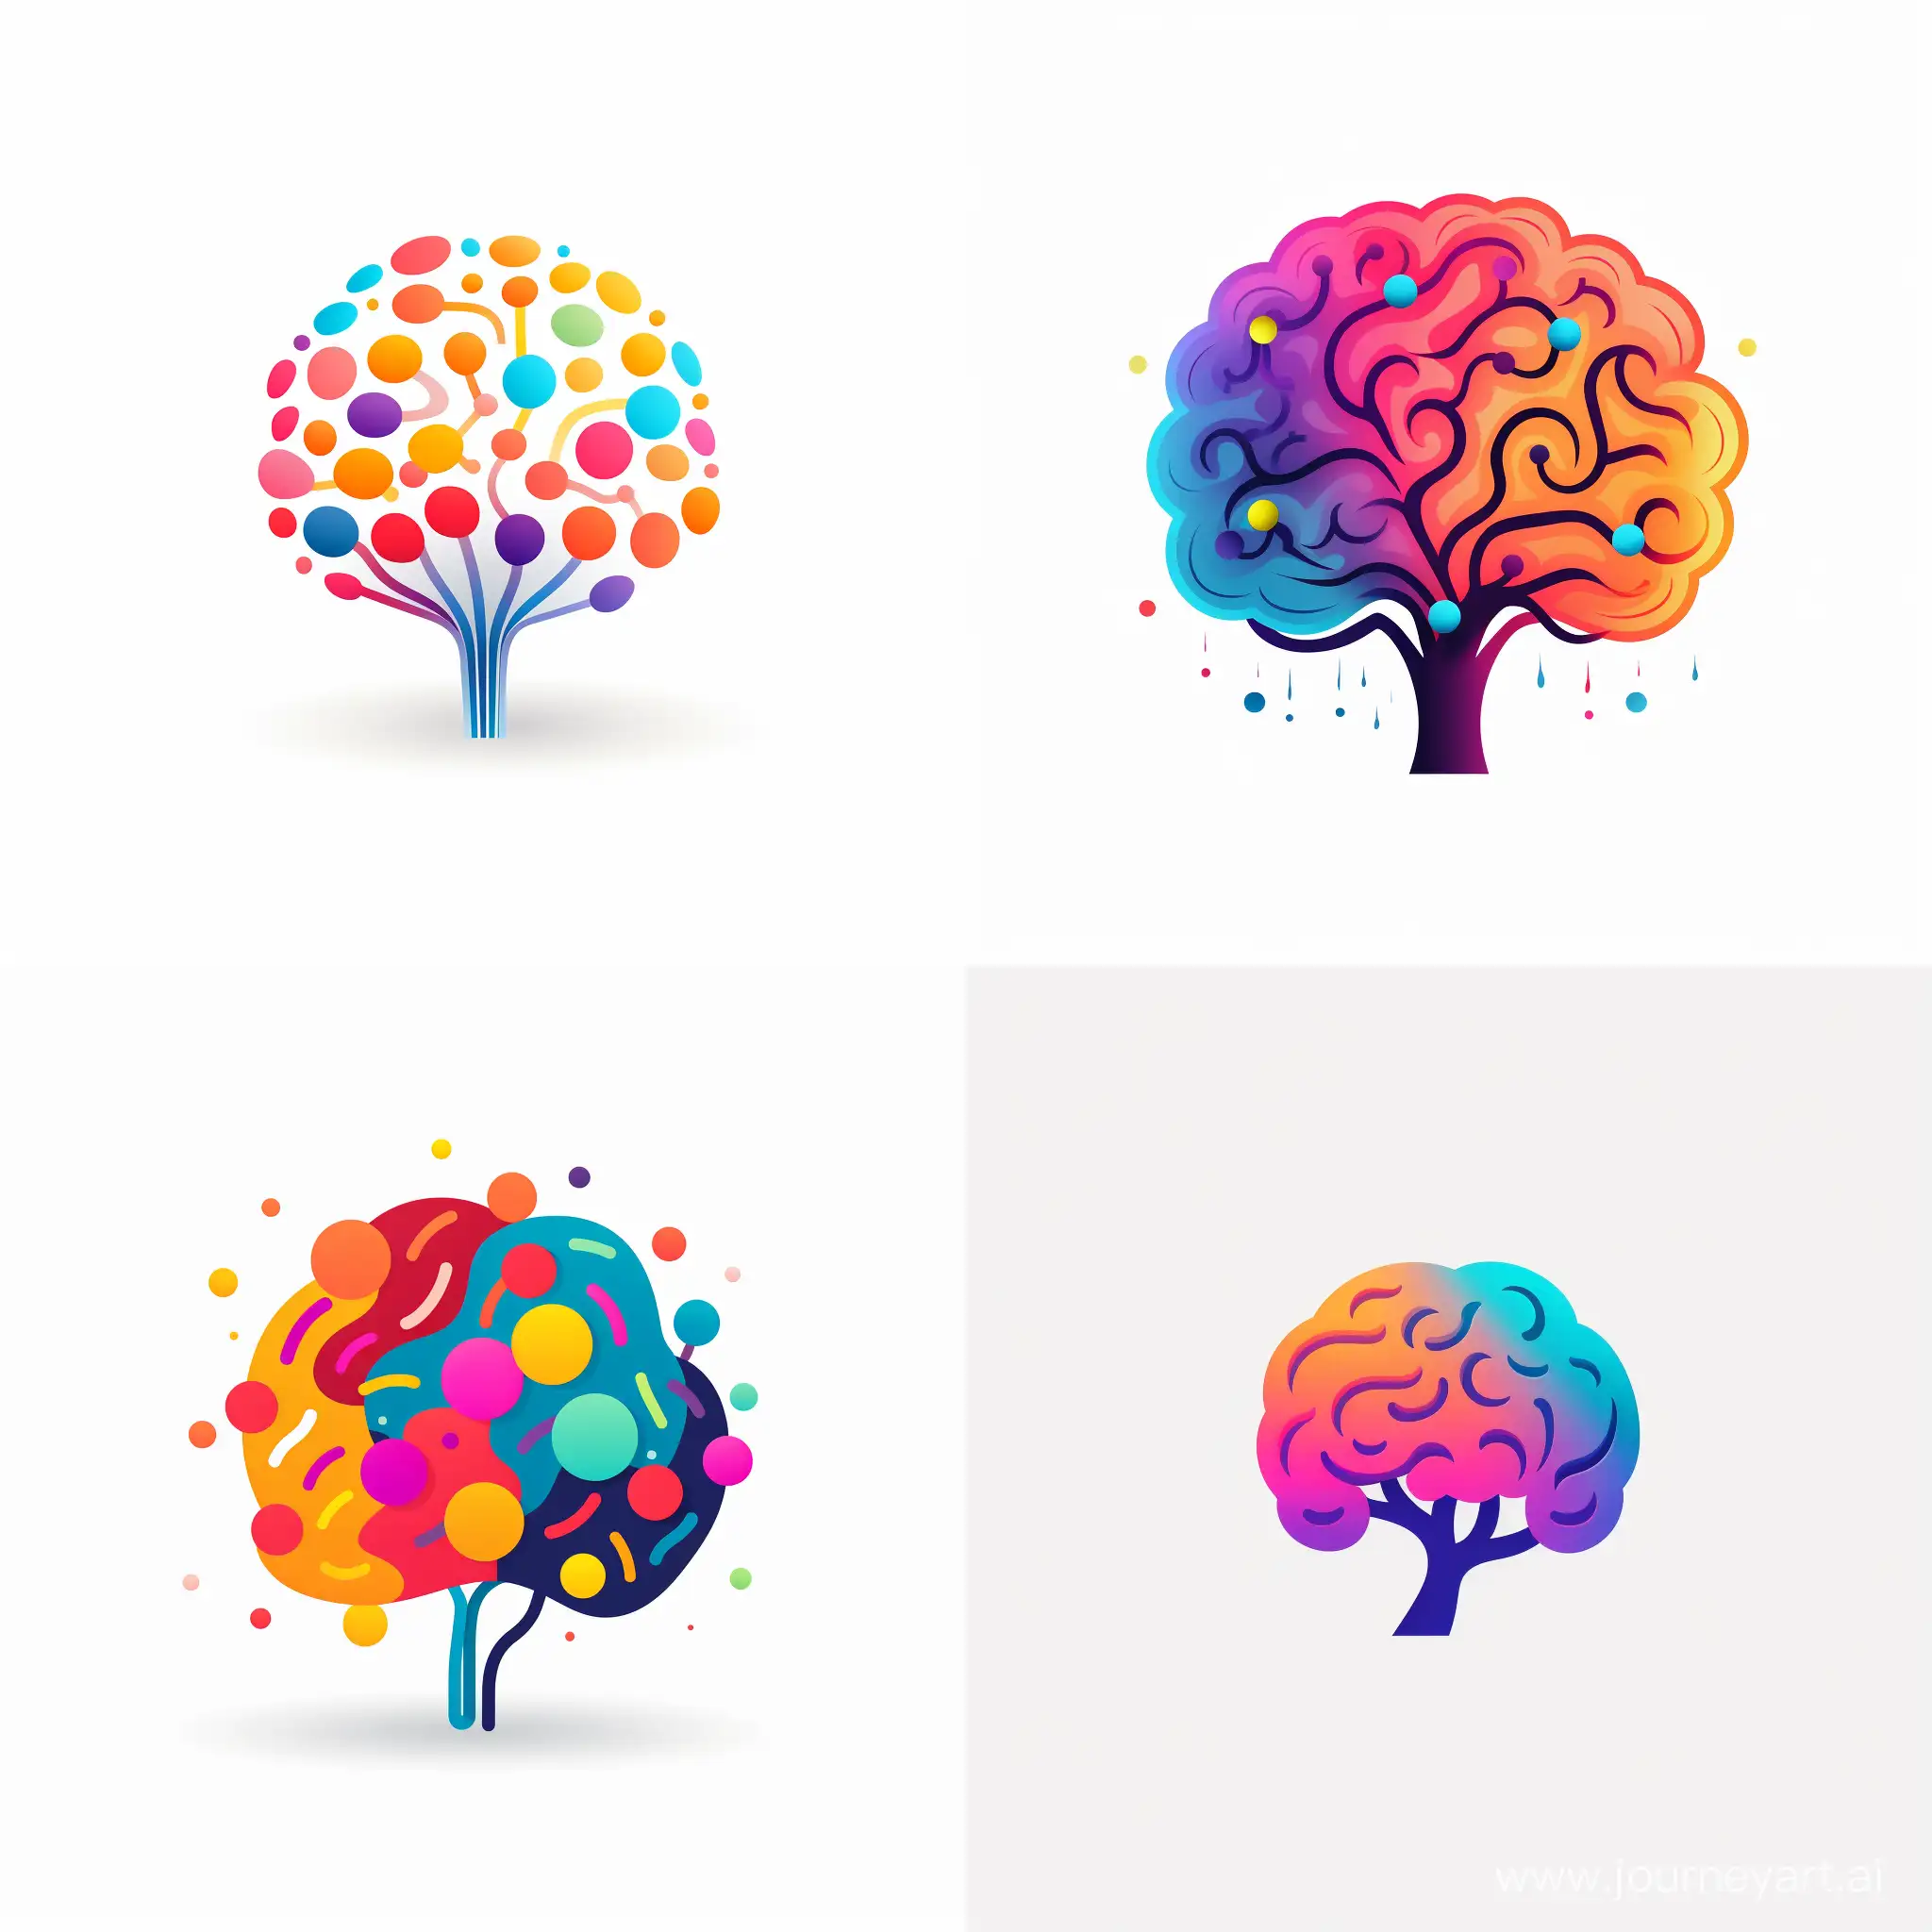 A colorful simple drawing of a brain, LOGO